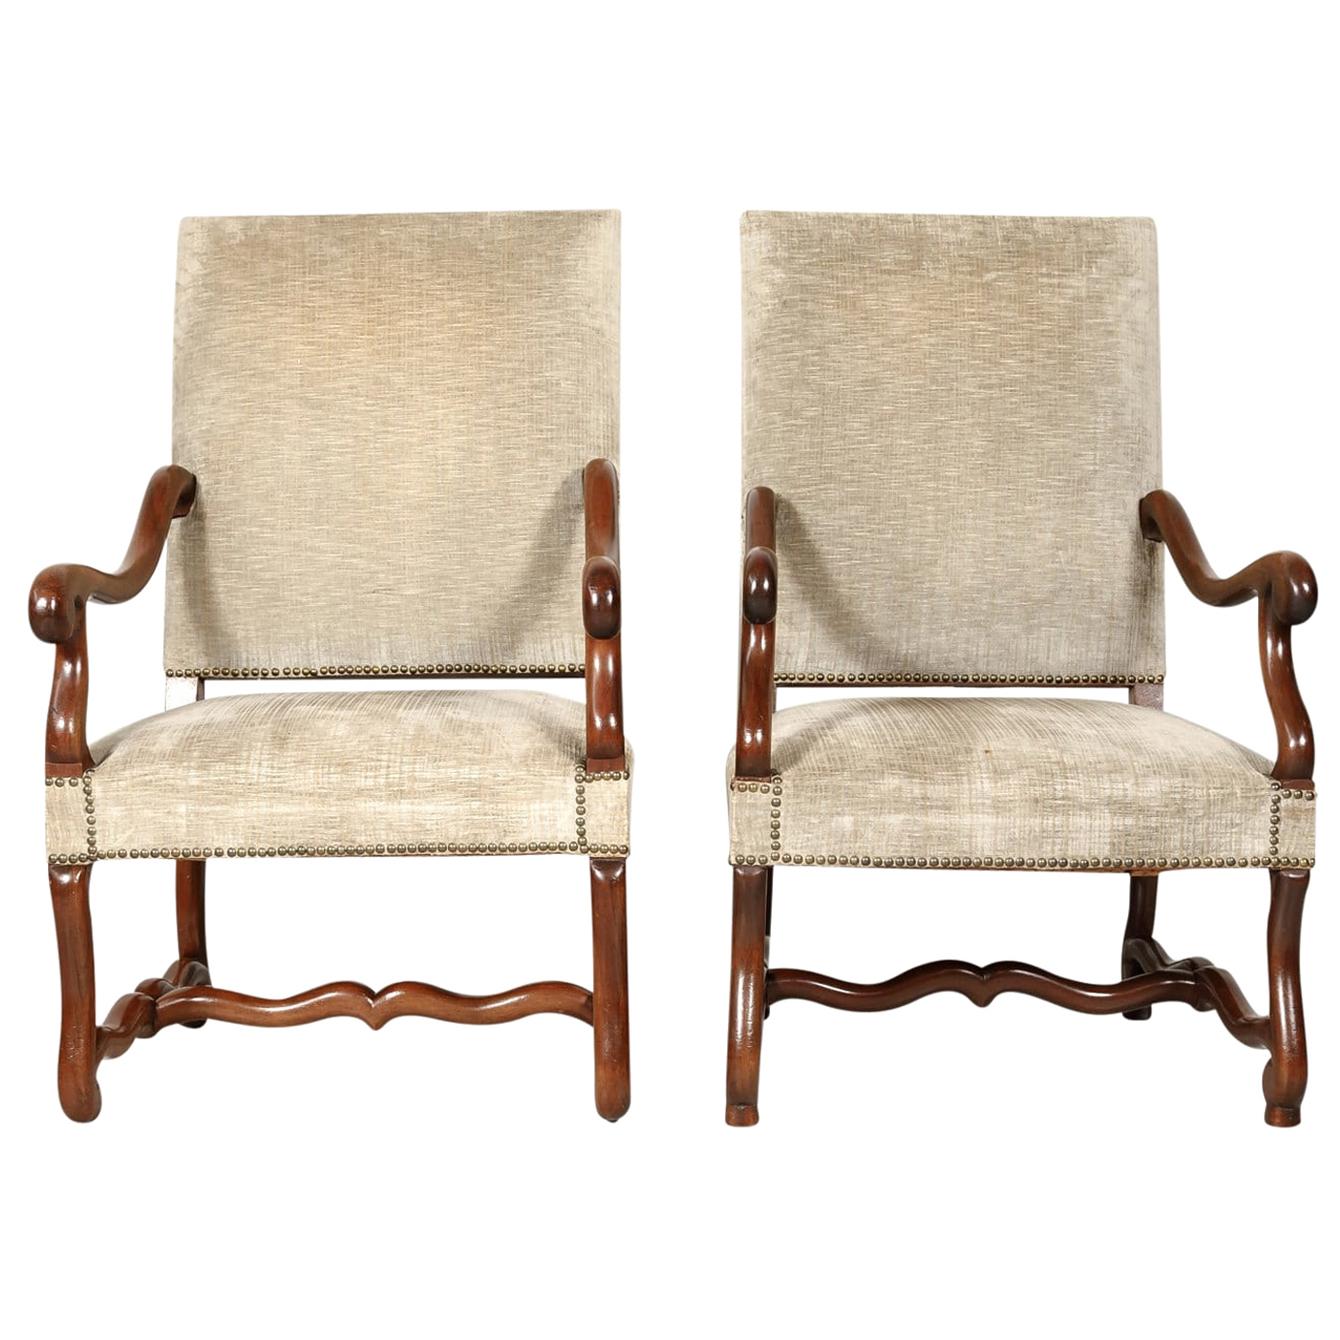 Pair of French Louis XIII Style Os de Mouton Armchairs